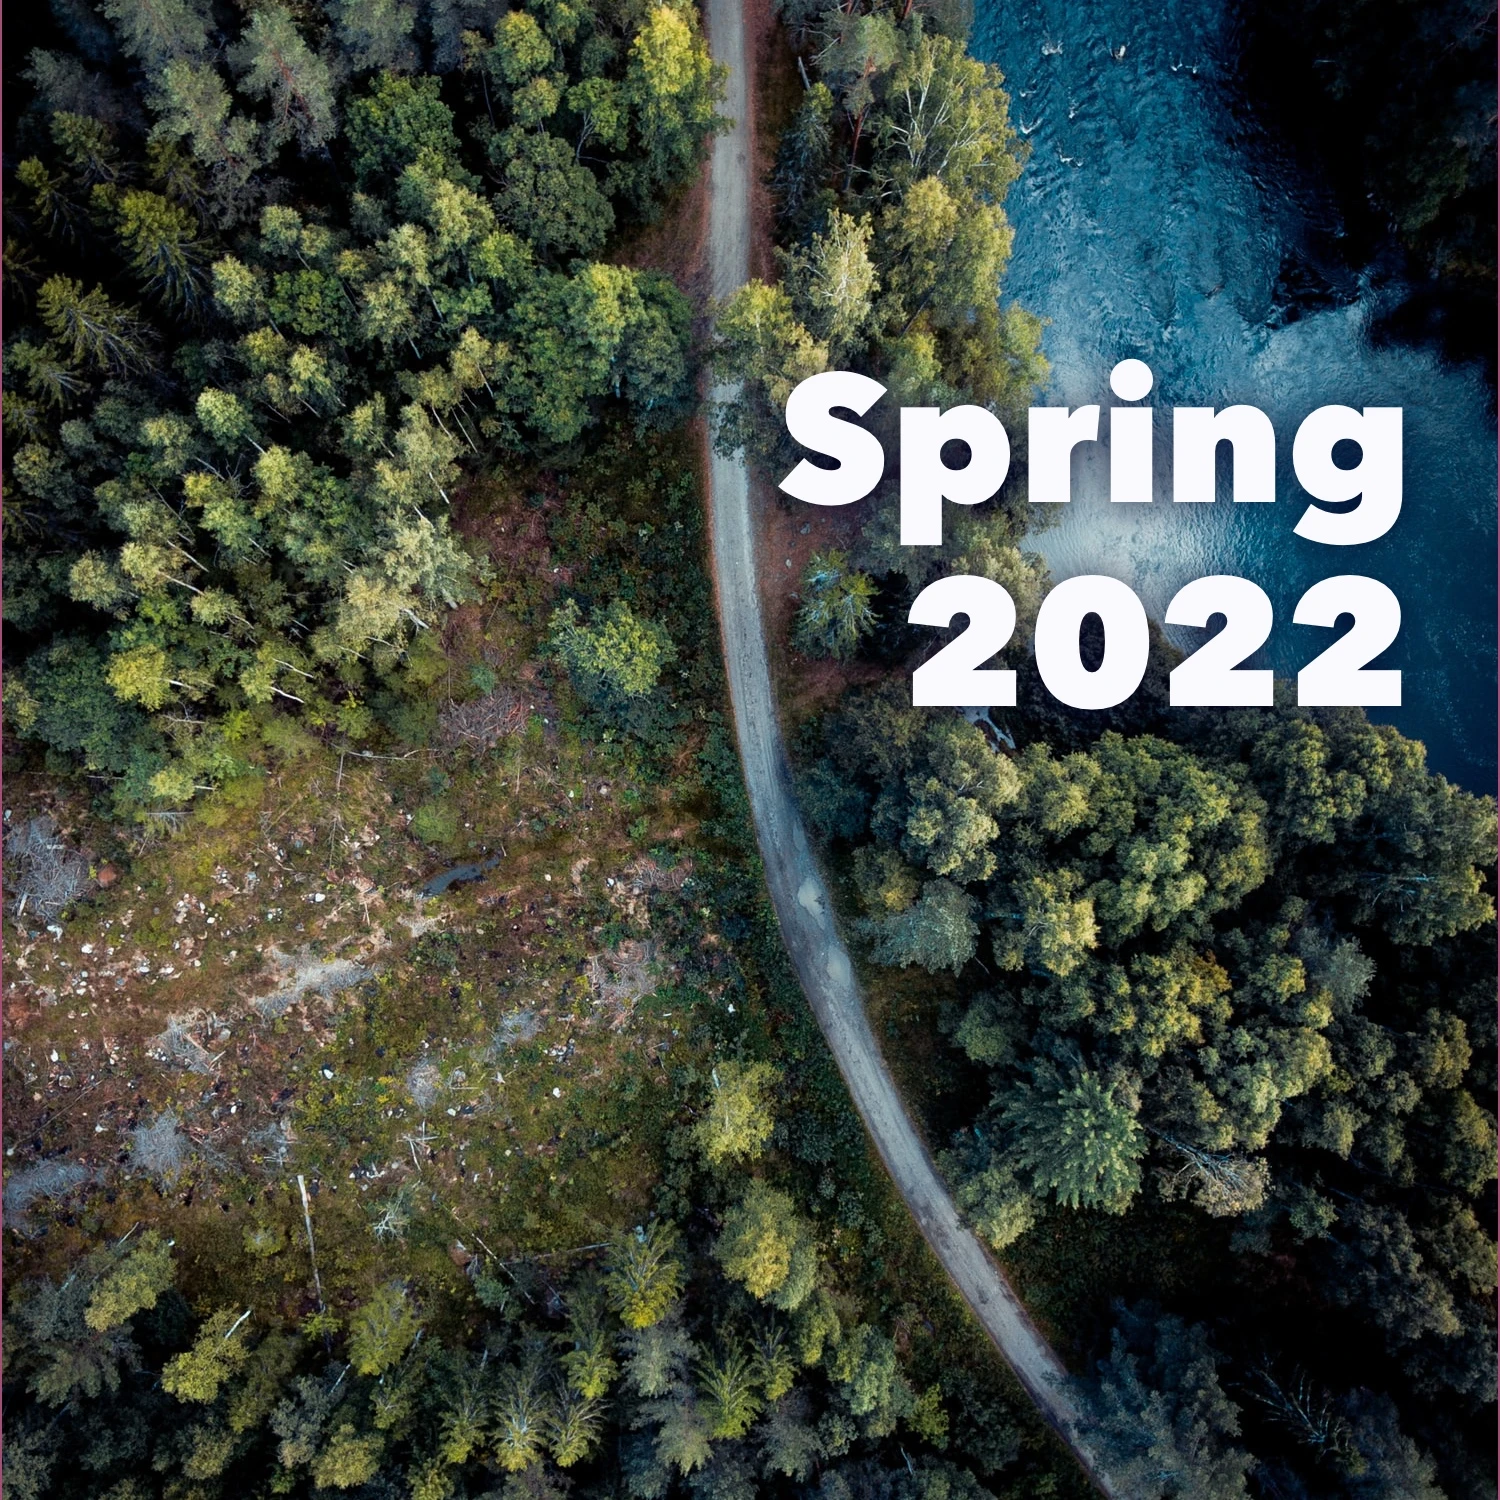 Spring 2022 text over photo of winding road